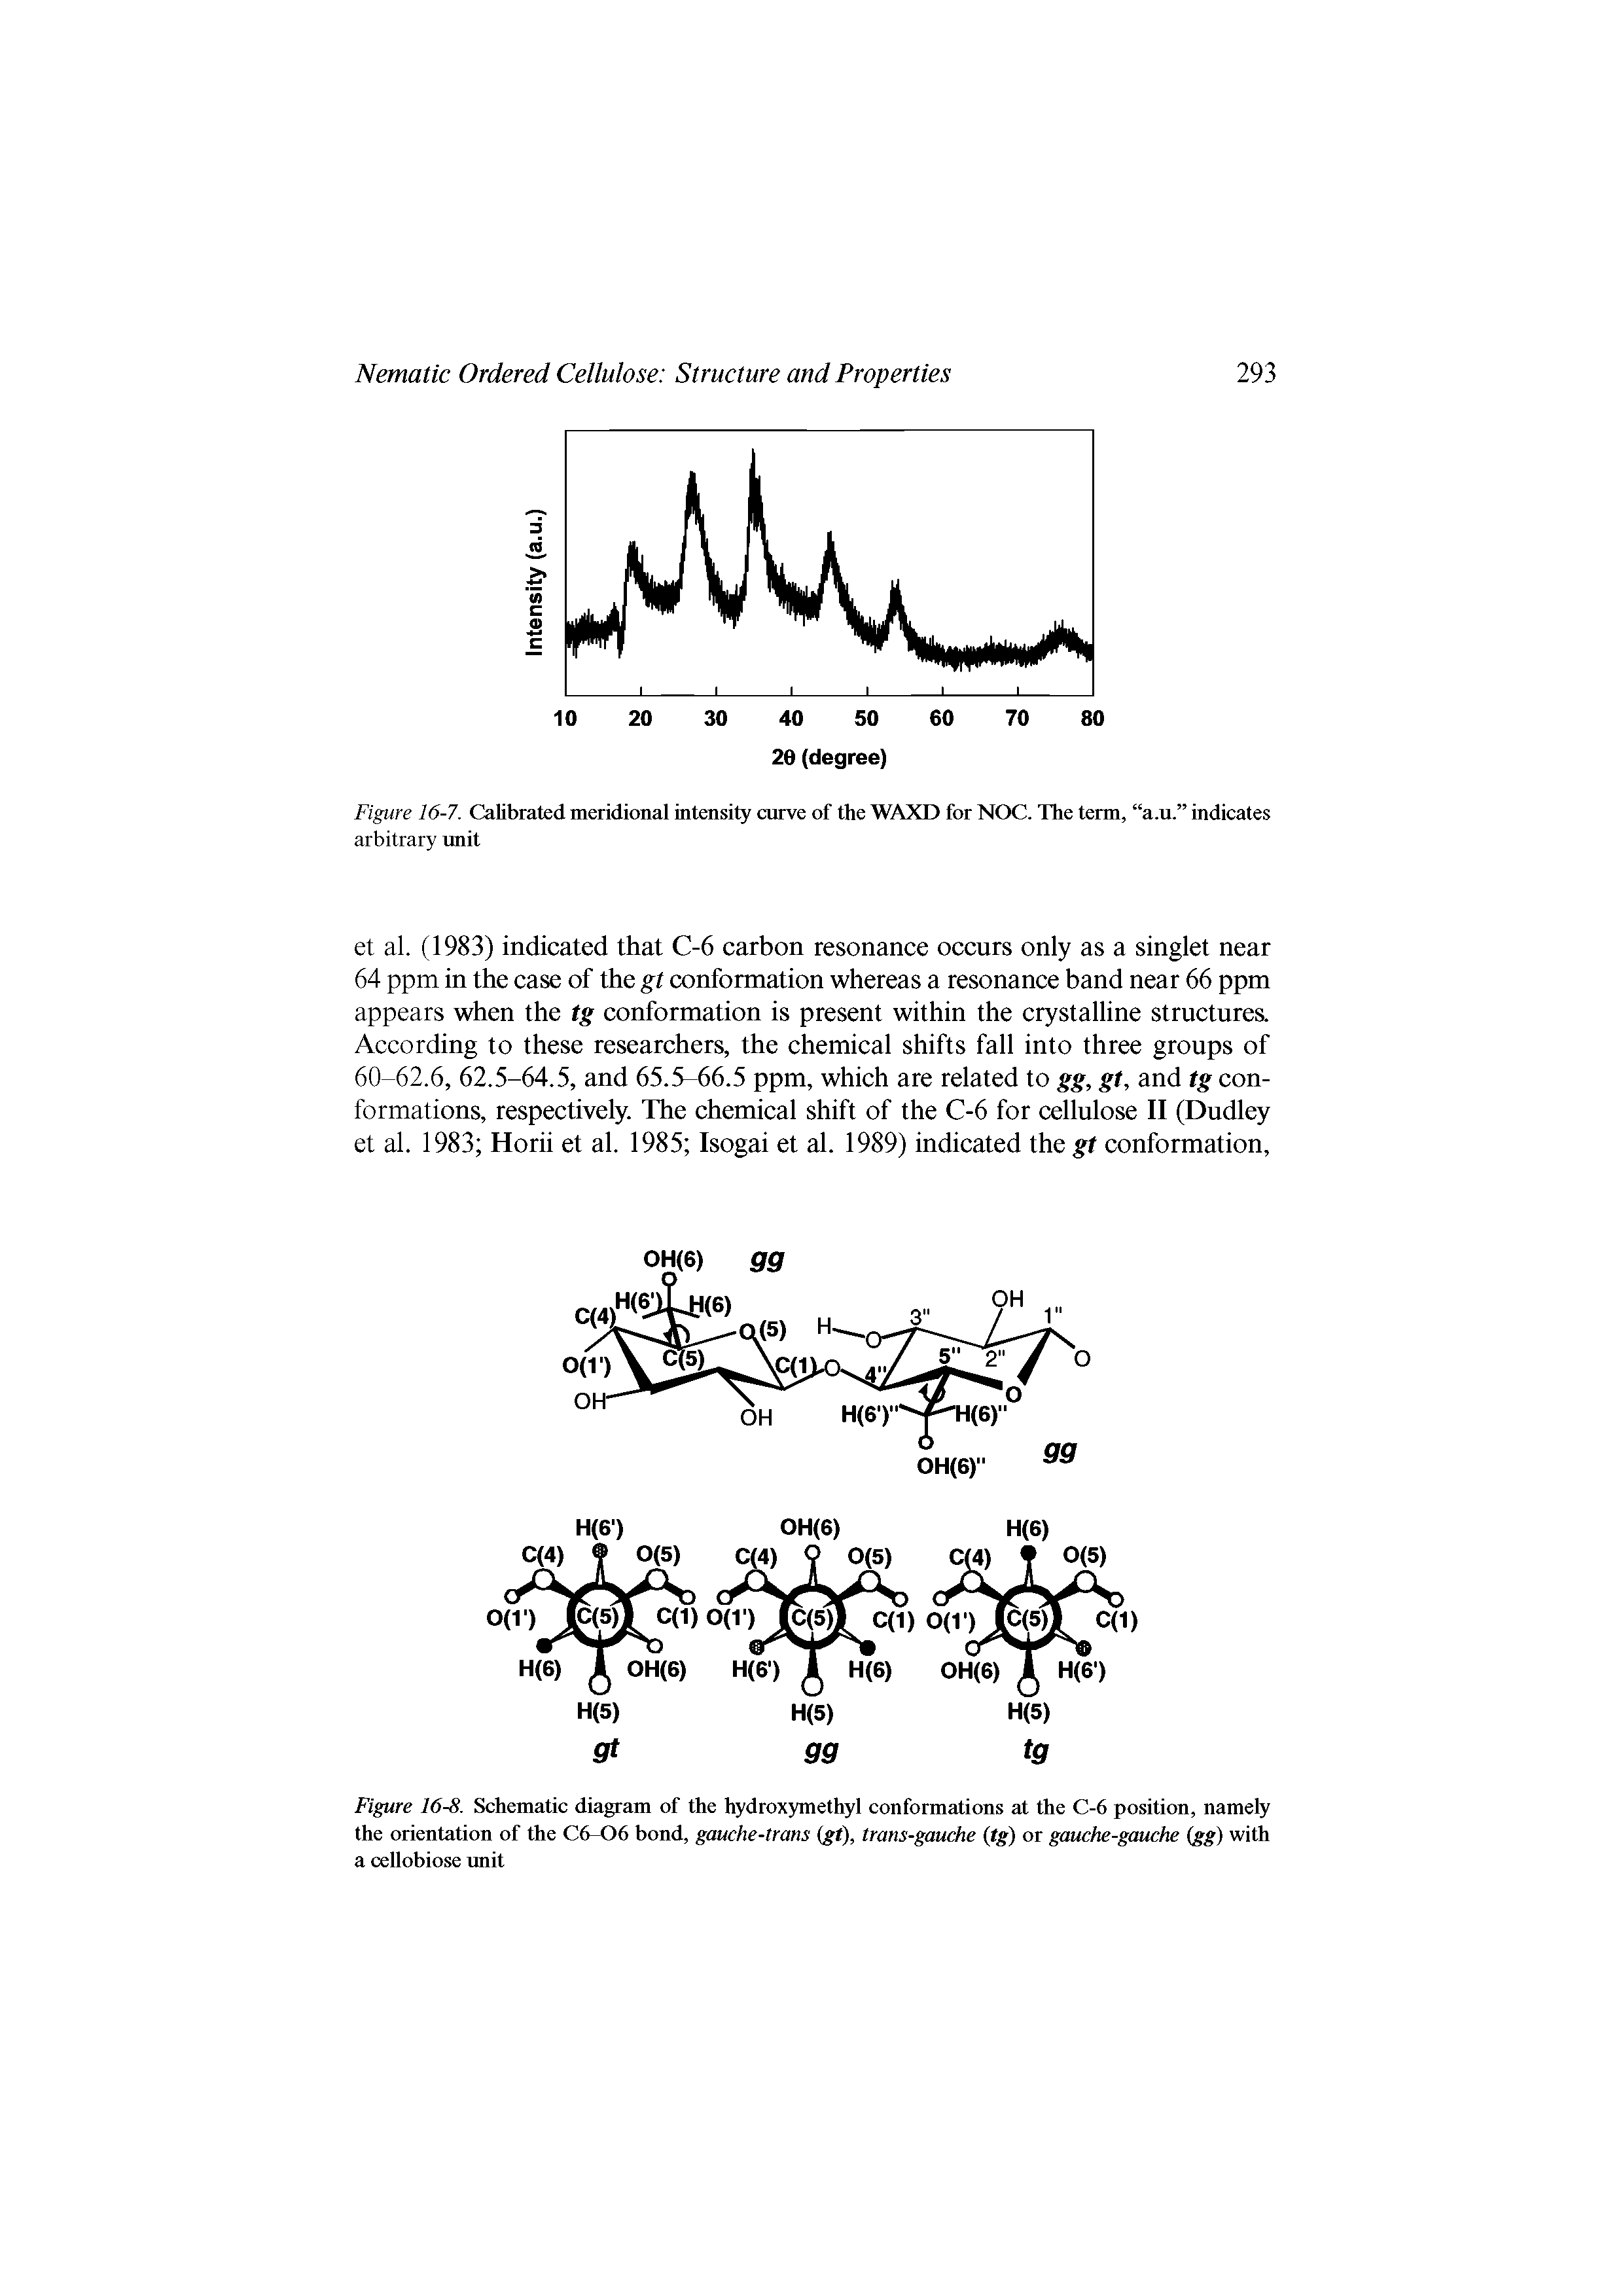 Figure 16-8. Schematic diagram of the hydroxymethyl conformations at the C-6 position, namely the orientation of the C6-06 bond, gauche-trans (gt), trans-gaudie (tg) or gauche-gauche (gg) with a cellobiose unit...